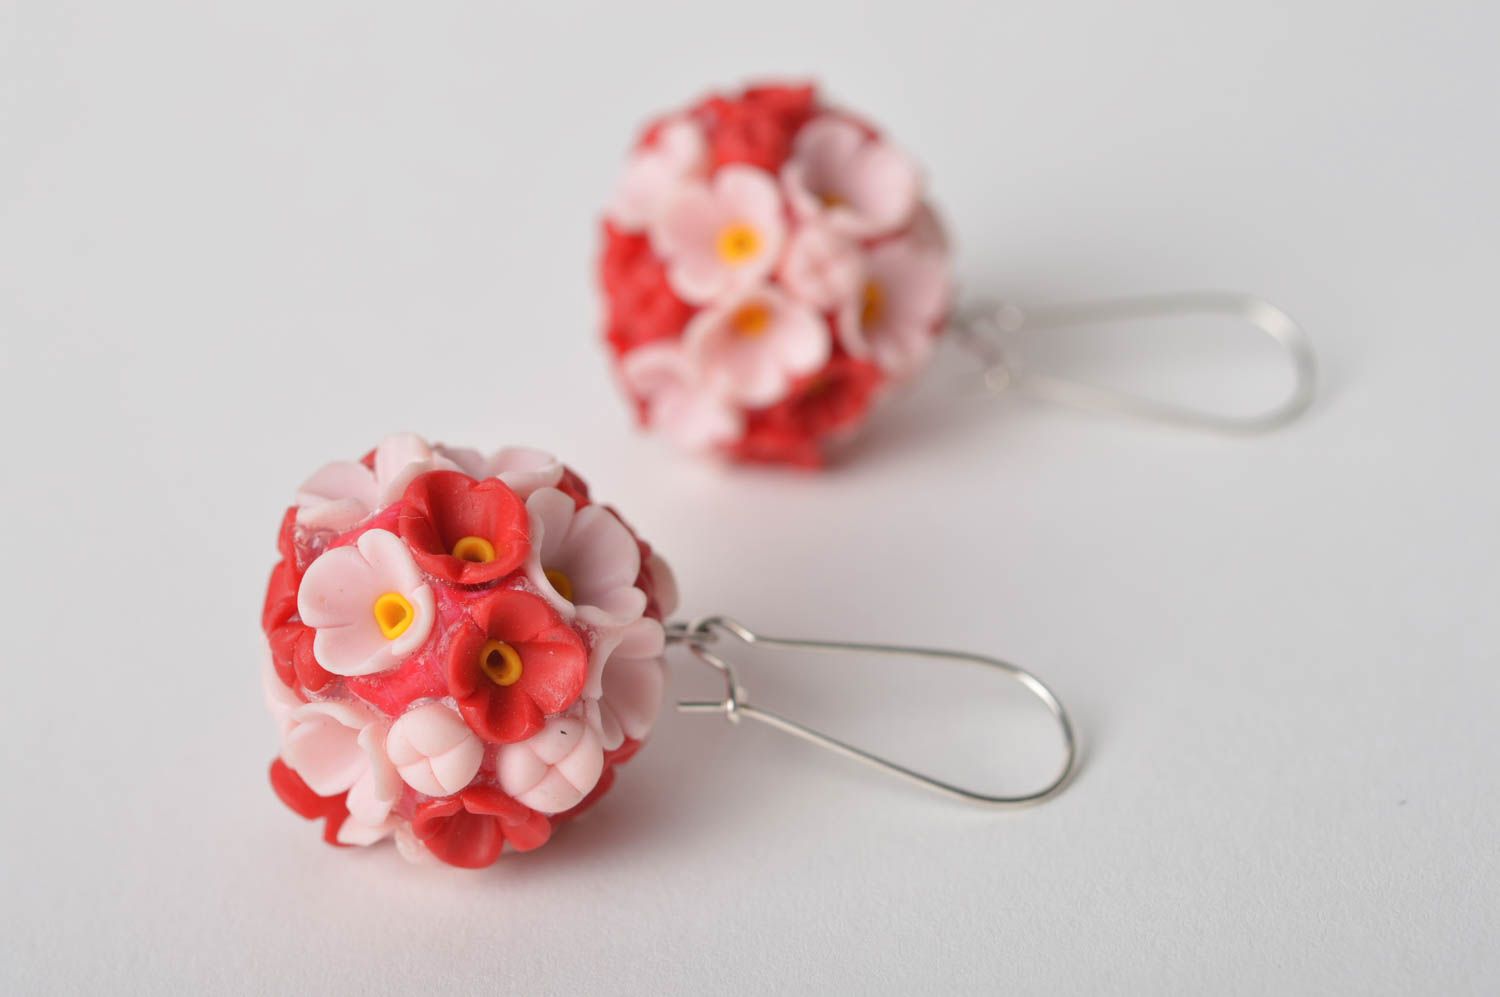 Handmade Polymer Clay Earrings, Floral Earrings, Dangle Earrings, White Clay  Earrings, Wood Earrings, Flowers, Gift for Her, Gift Idea